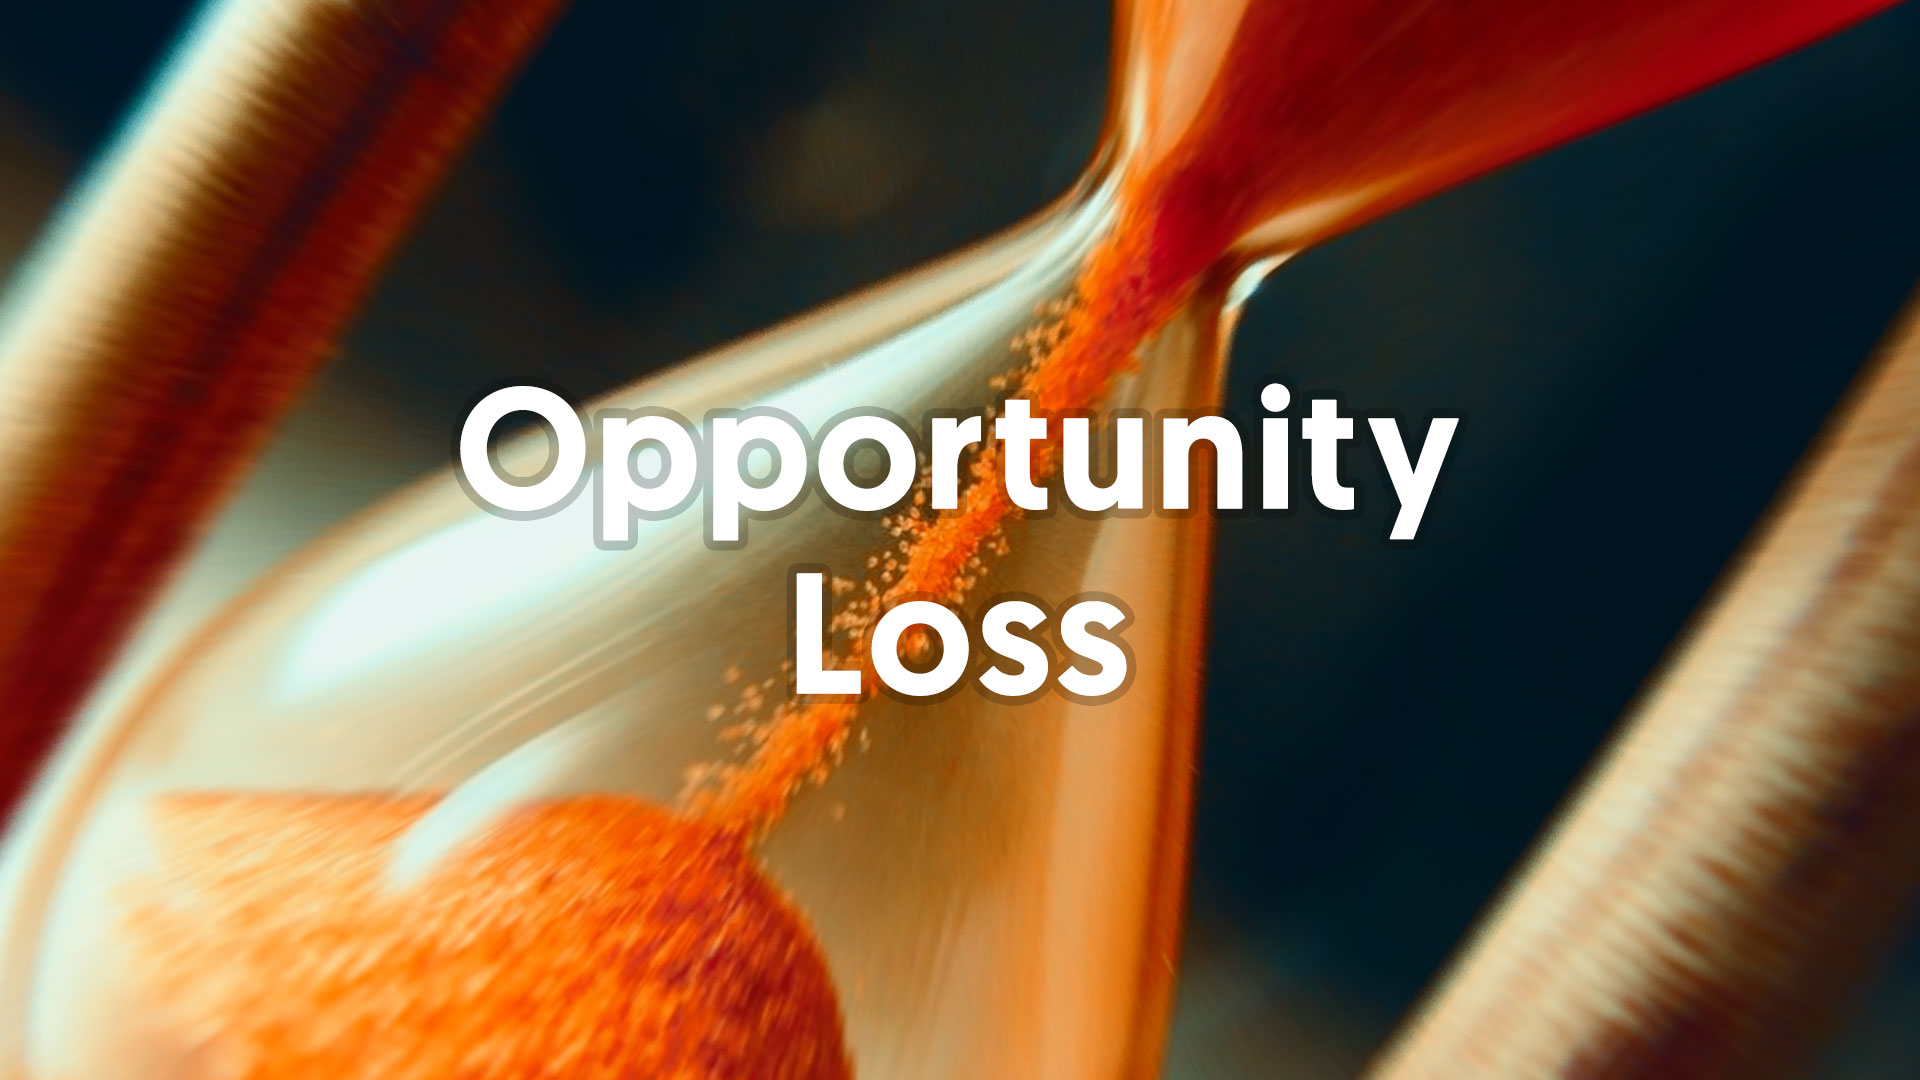 What is opportunity loss?